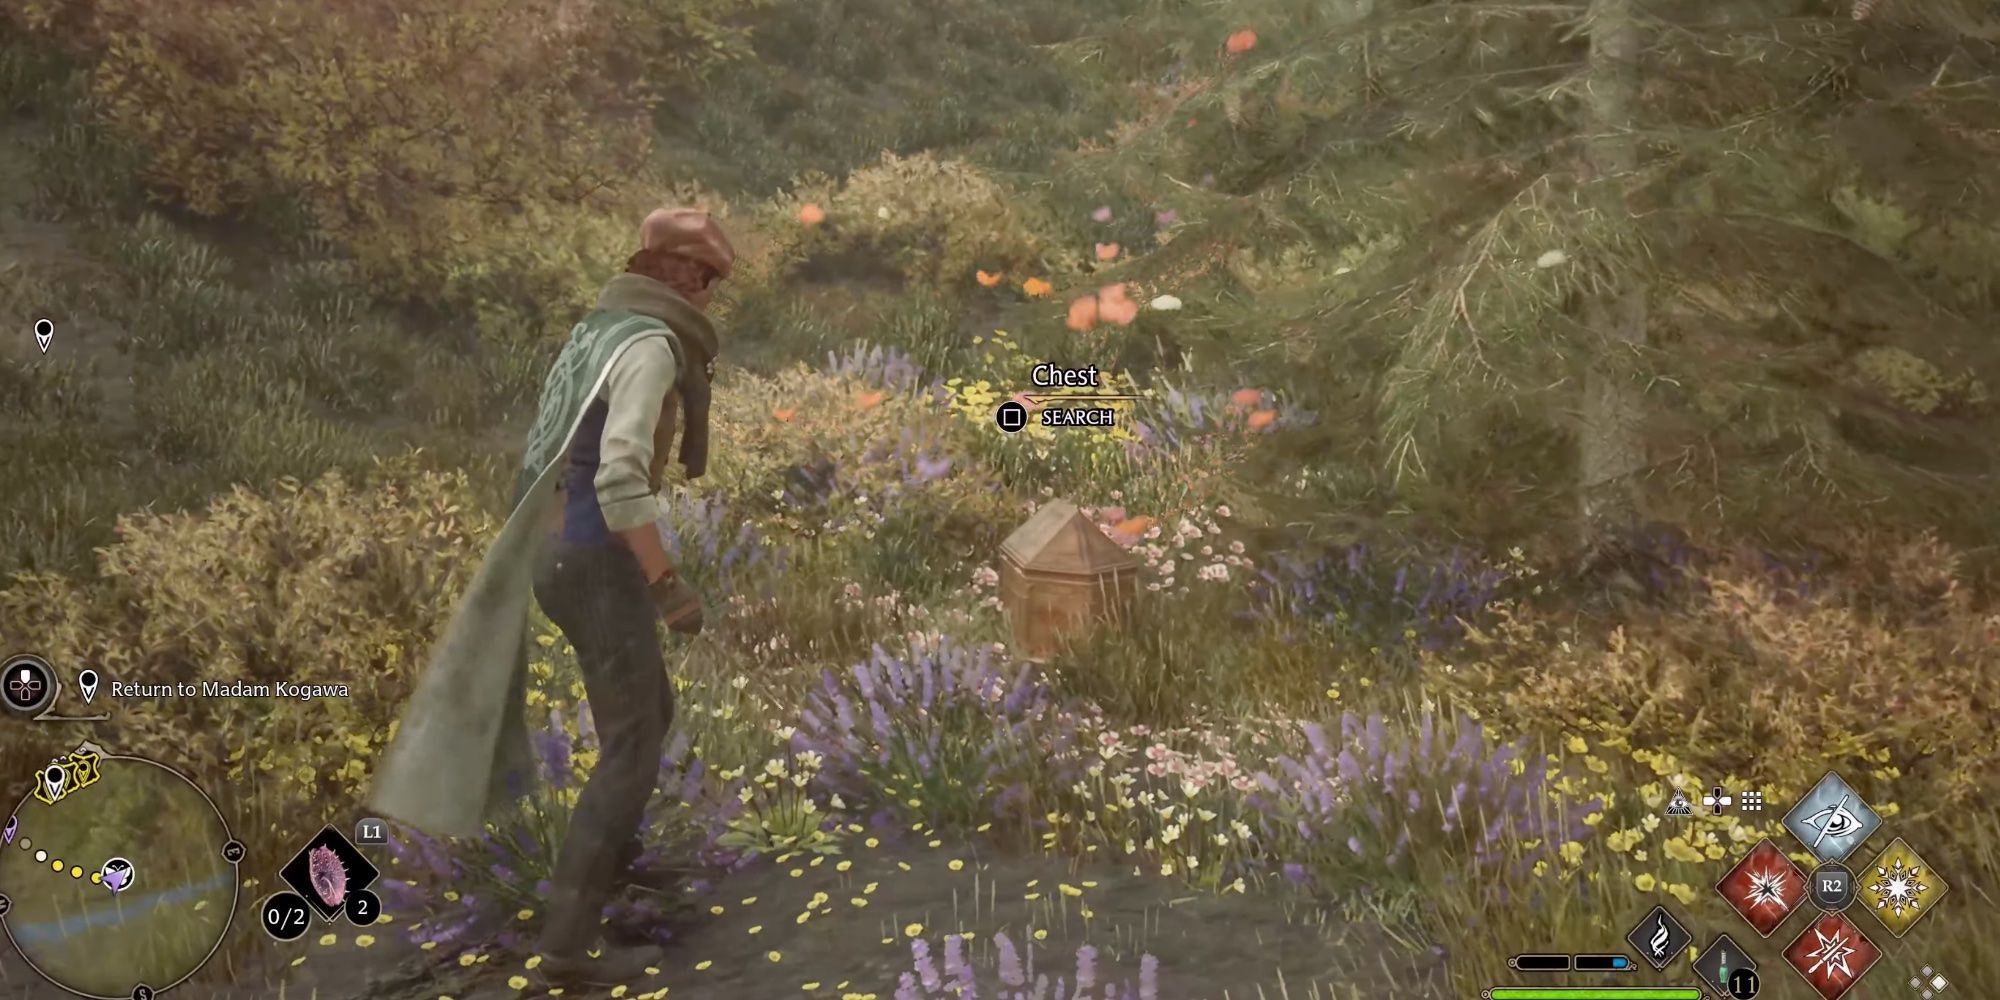 Player's character casting revelio to find a hidden chest surrounded by butterflies